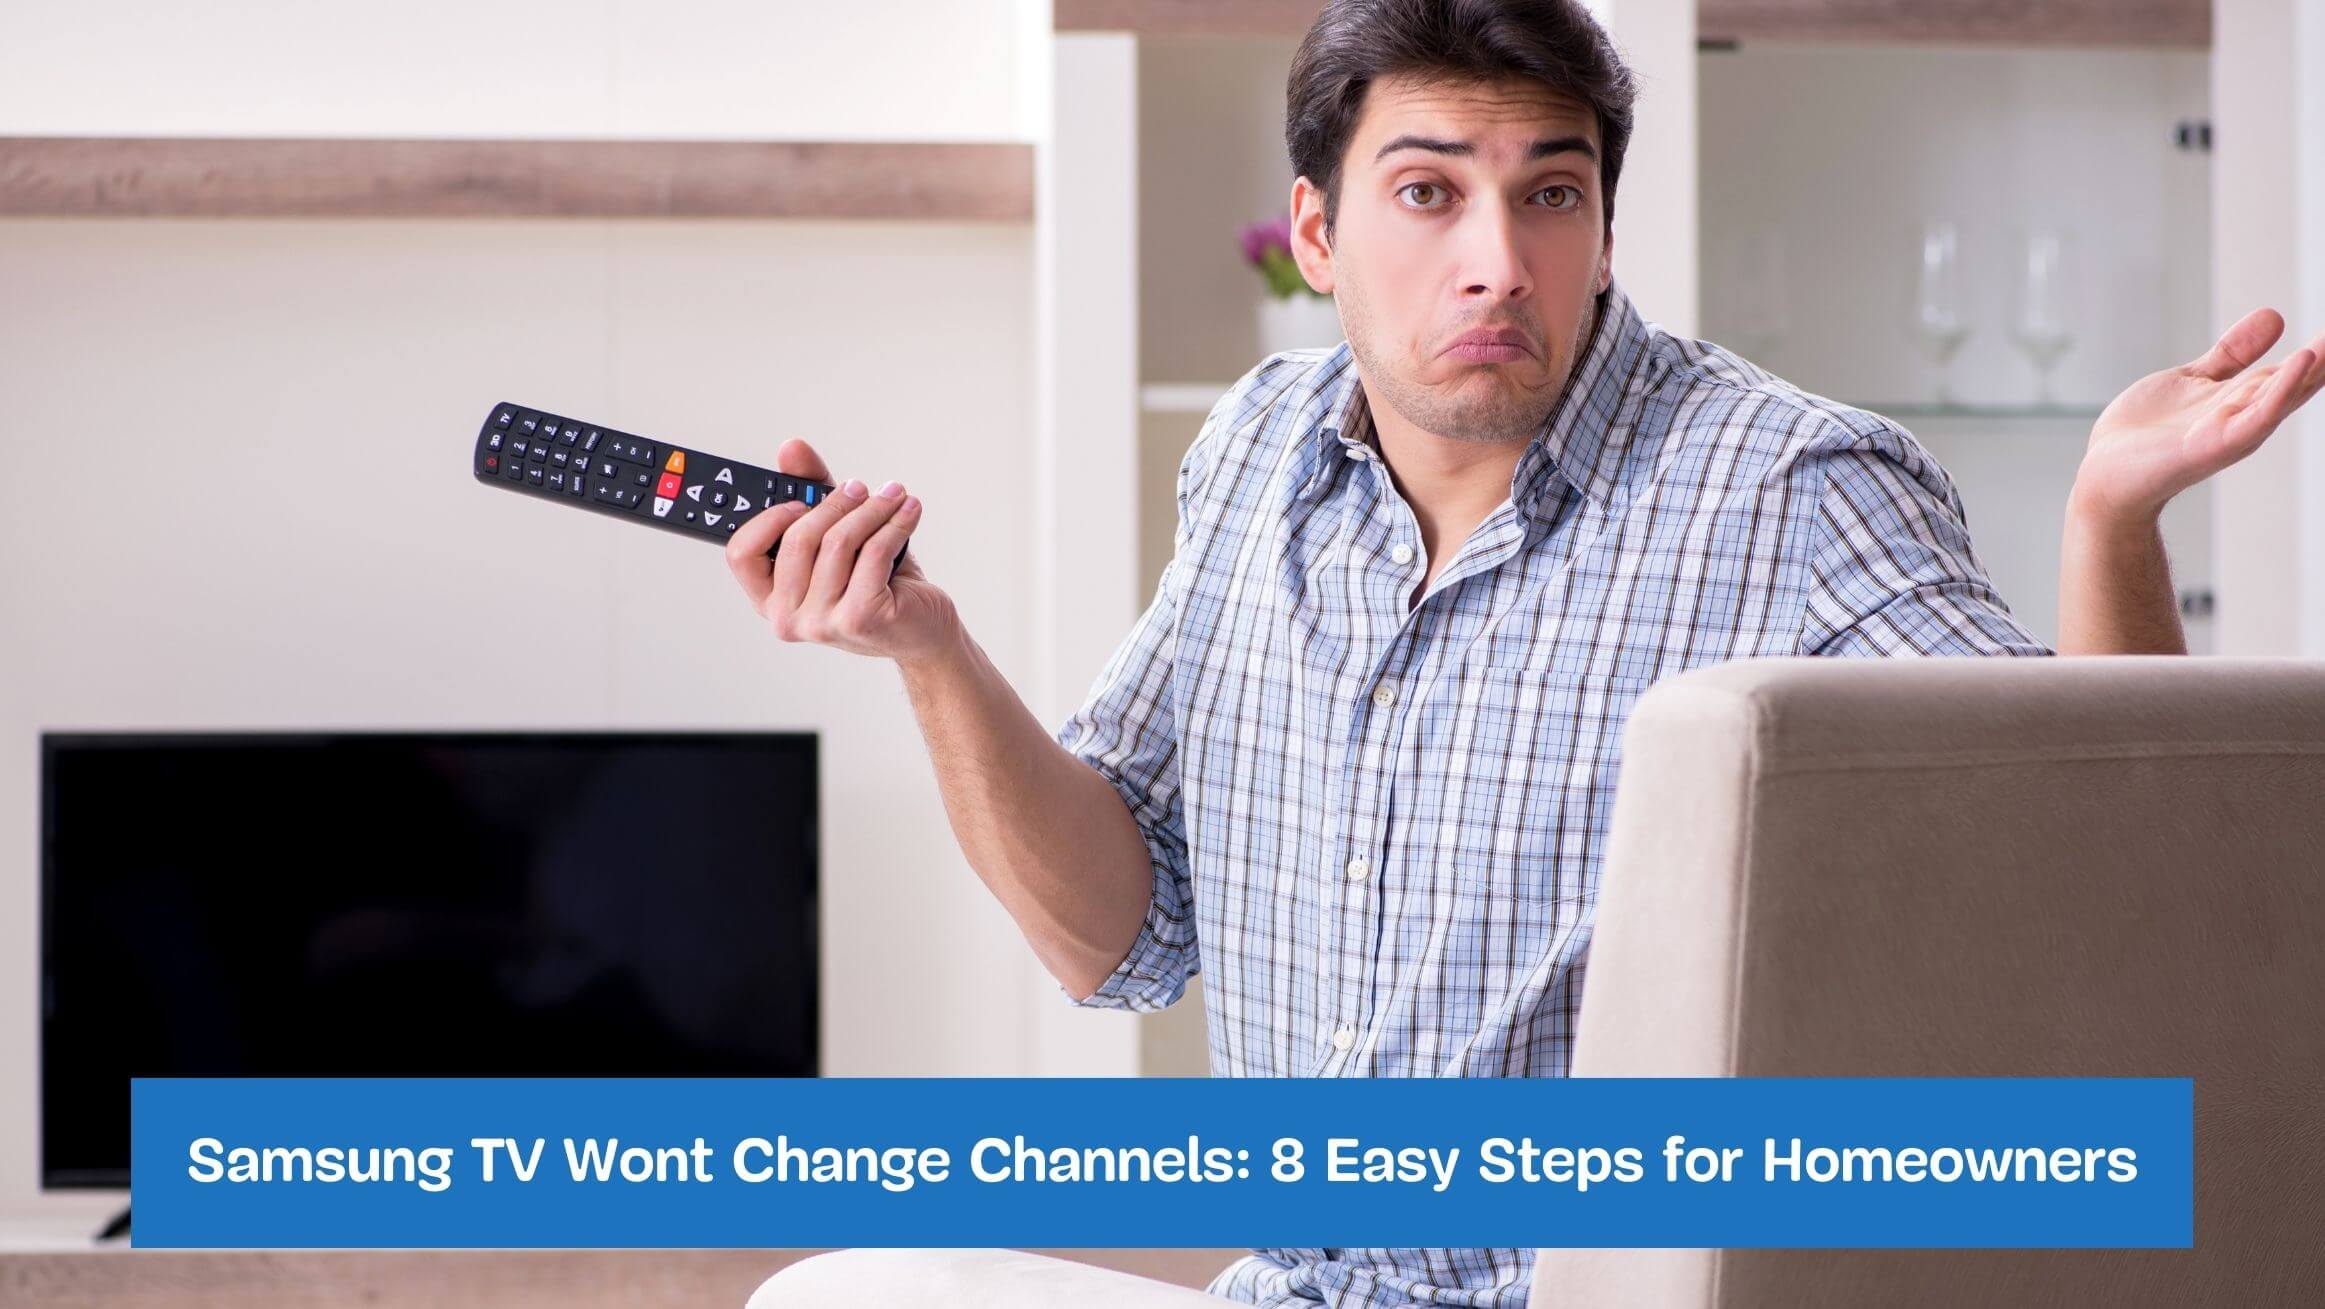 Samsung TV Wont Change Channels: 8 Easy Steps for Homeowners